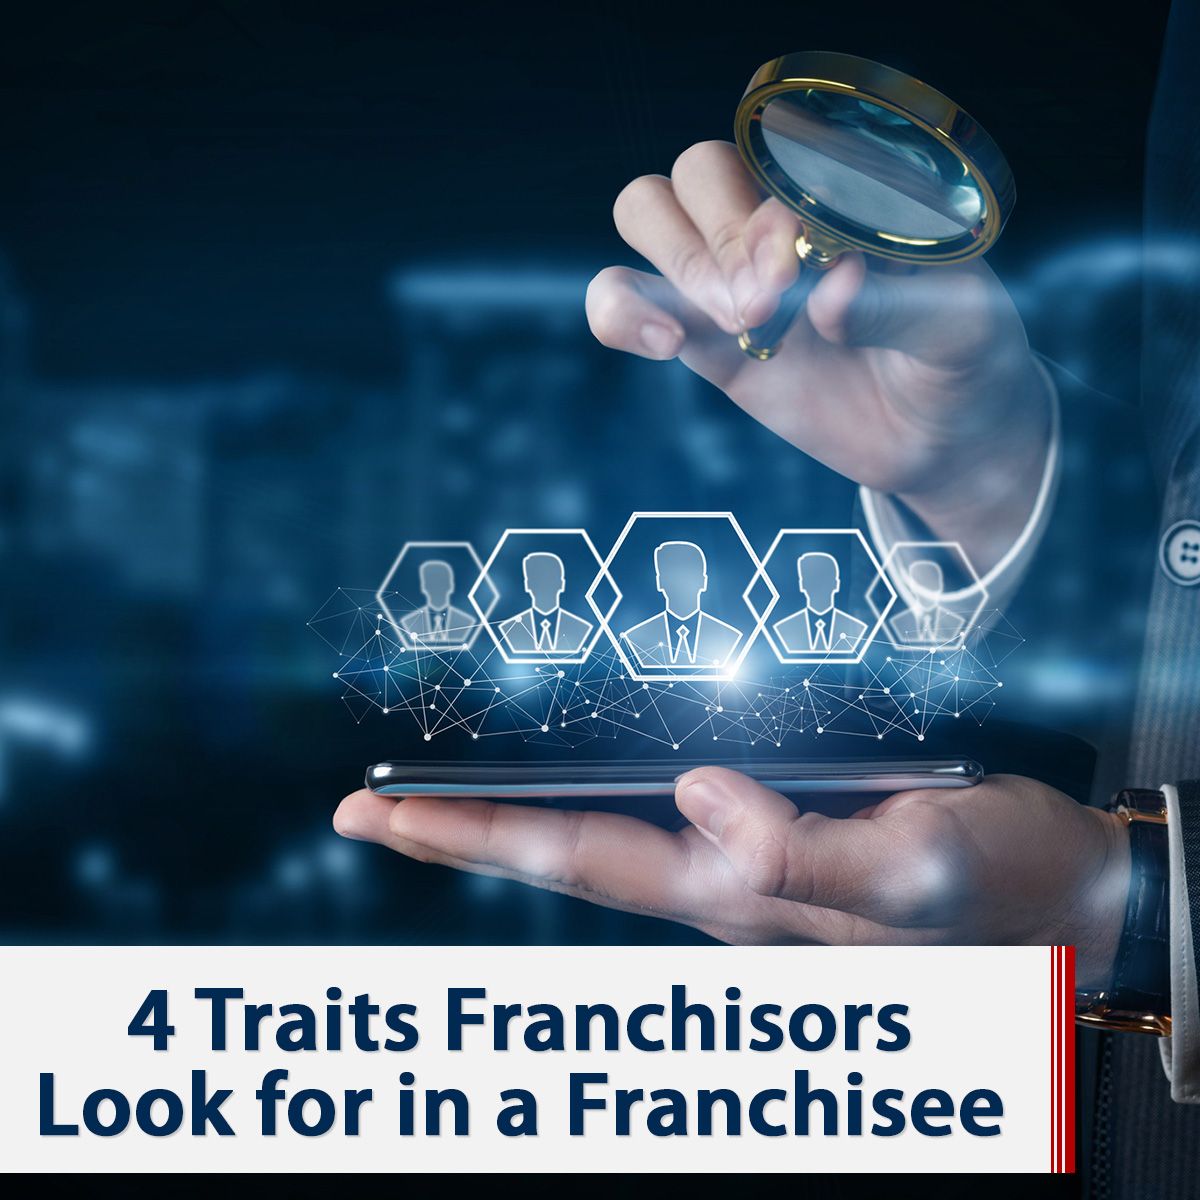 4 Traits Franchisors Look for in a Franchisee